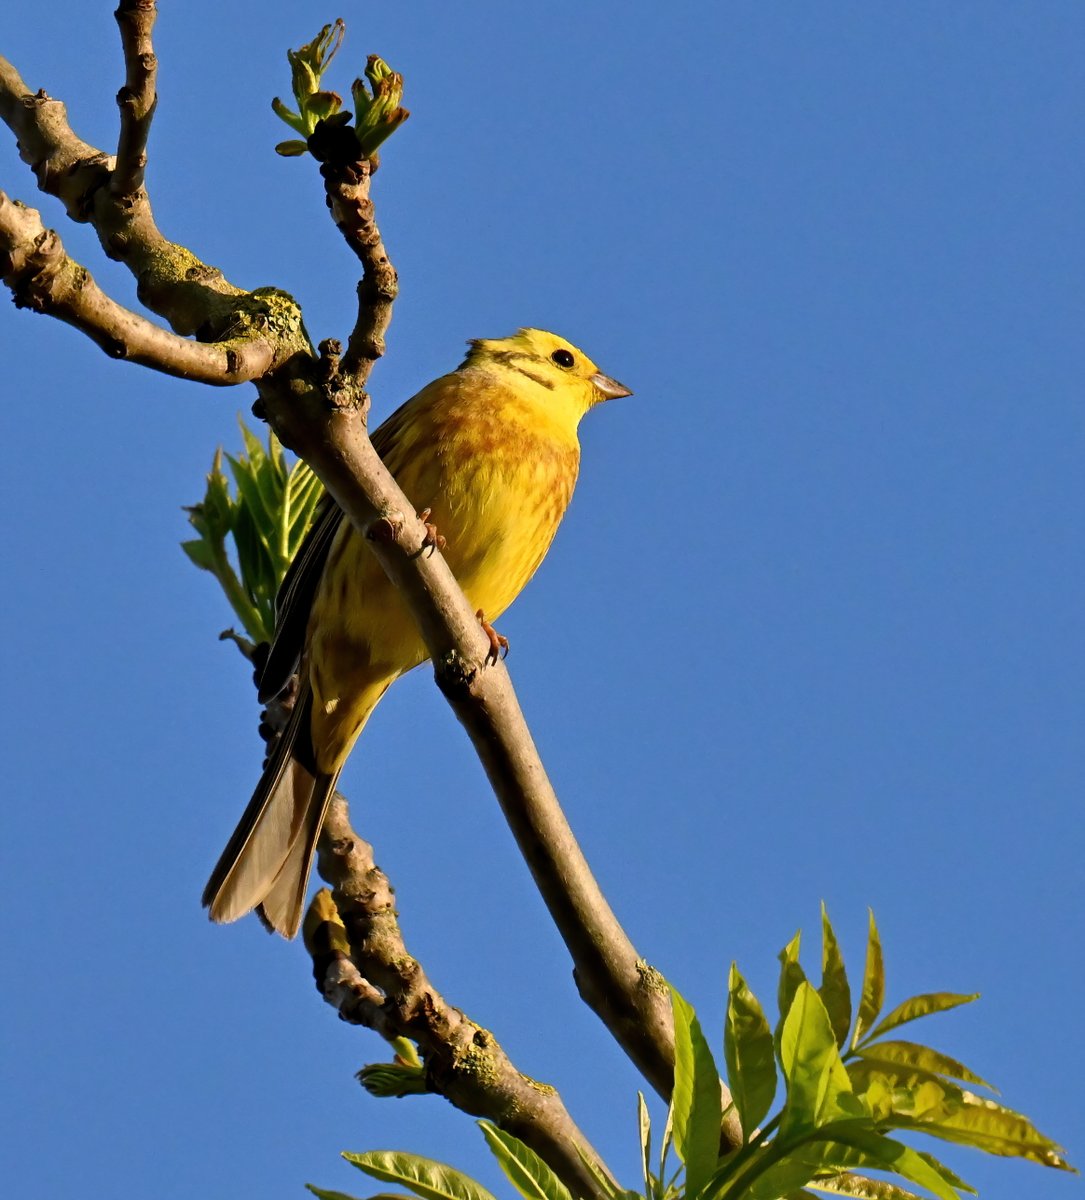 A beautiful Yellowhammer against the blue sky. 😍 Taken last week in my Somerset village. 😊🐦